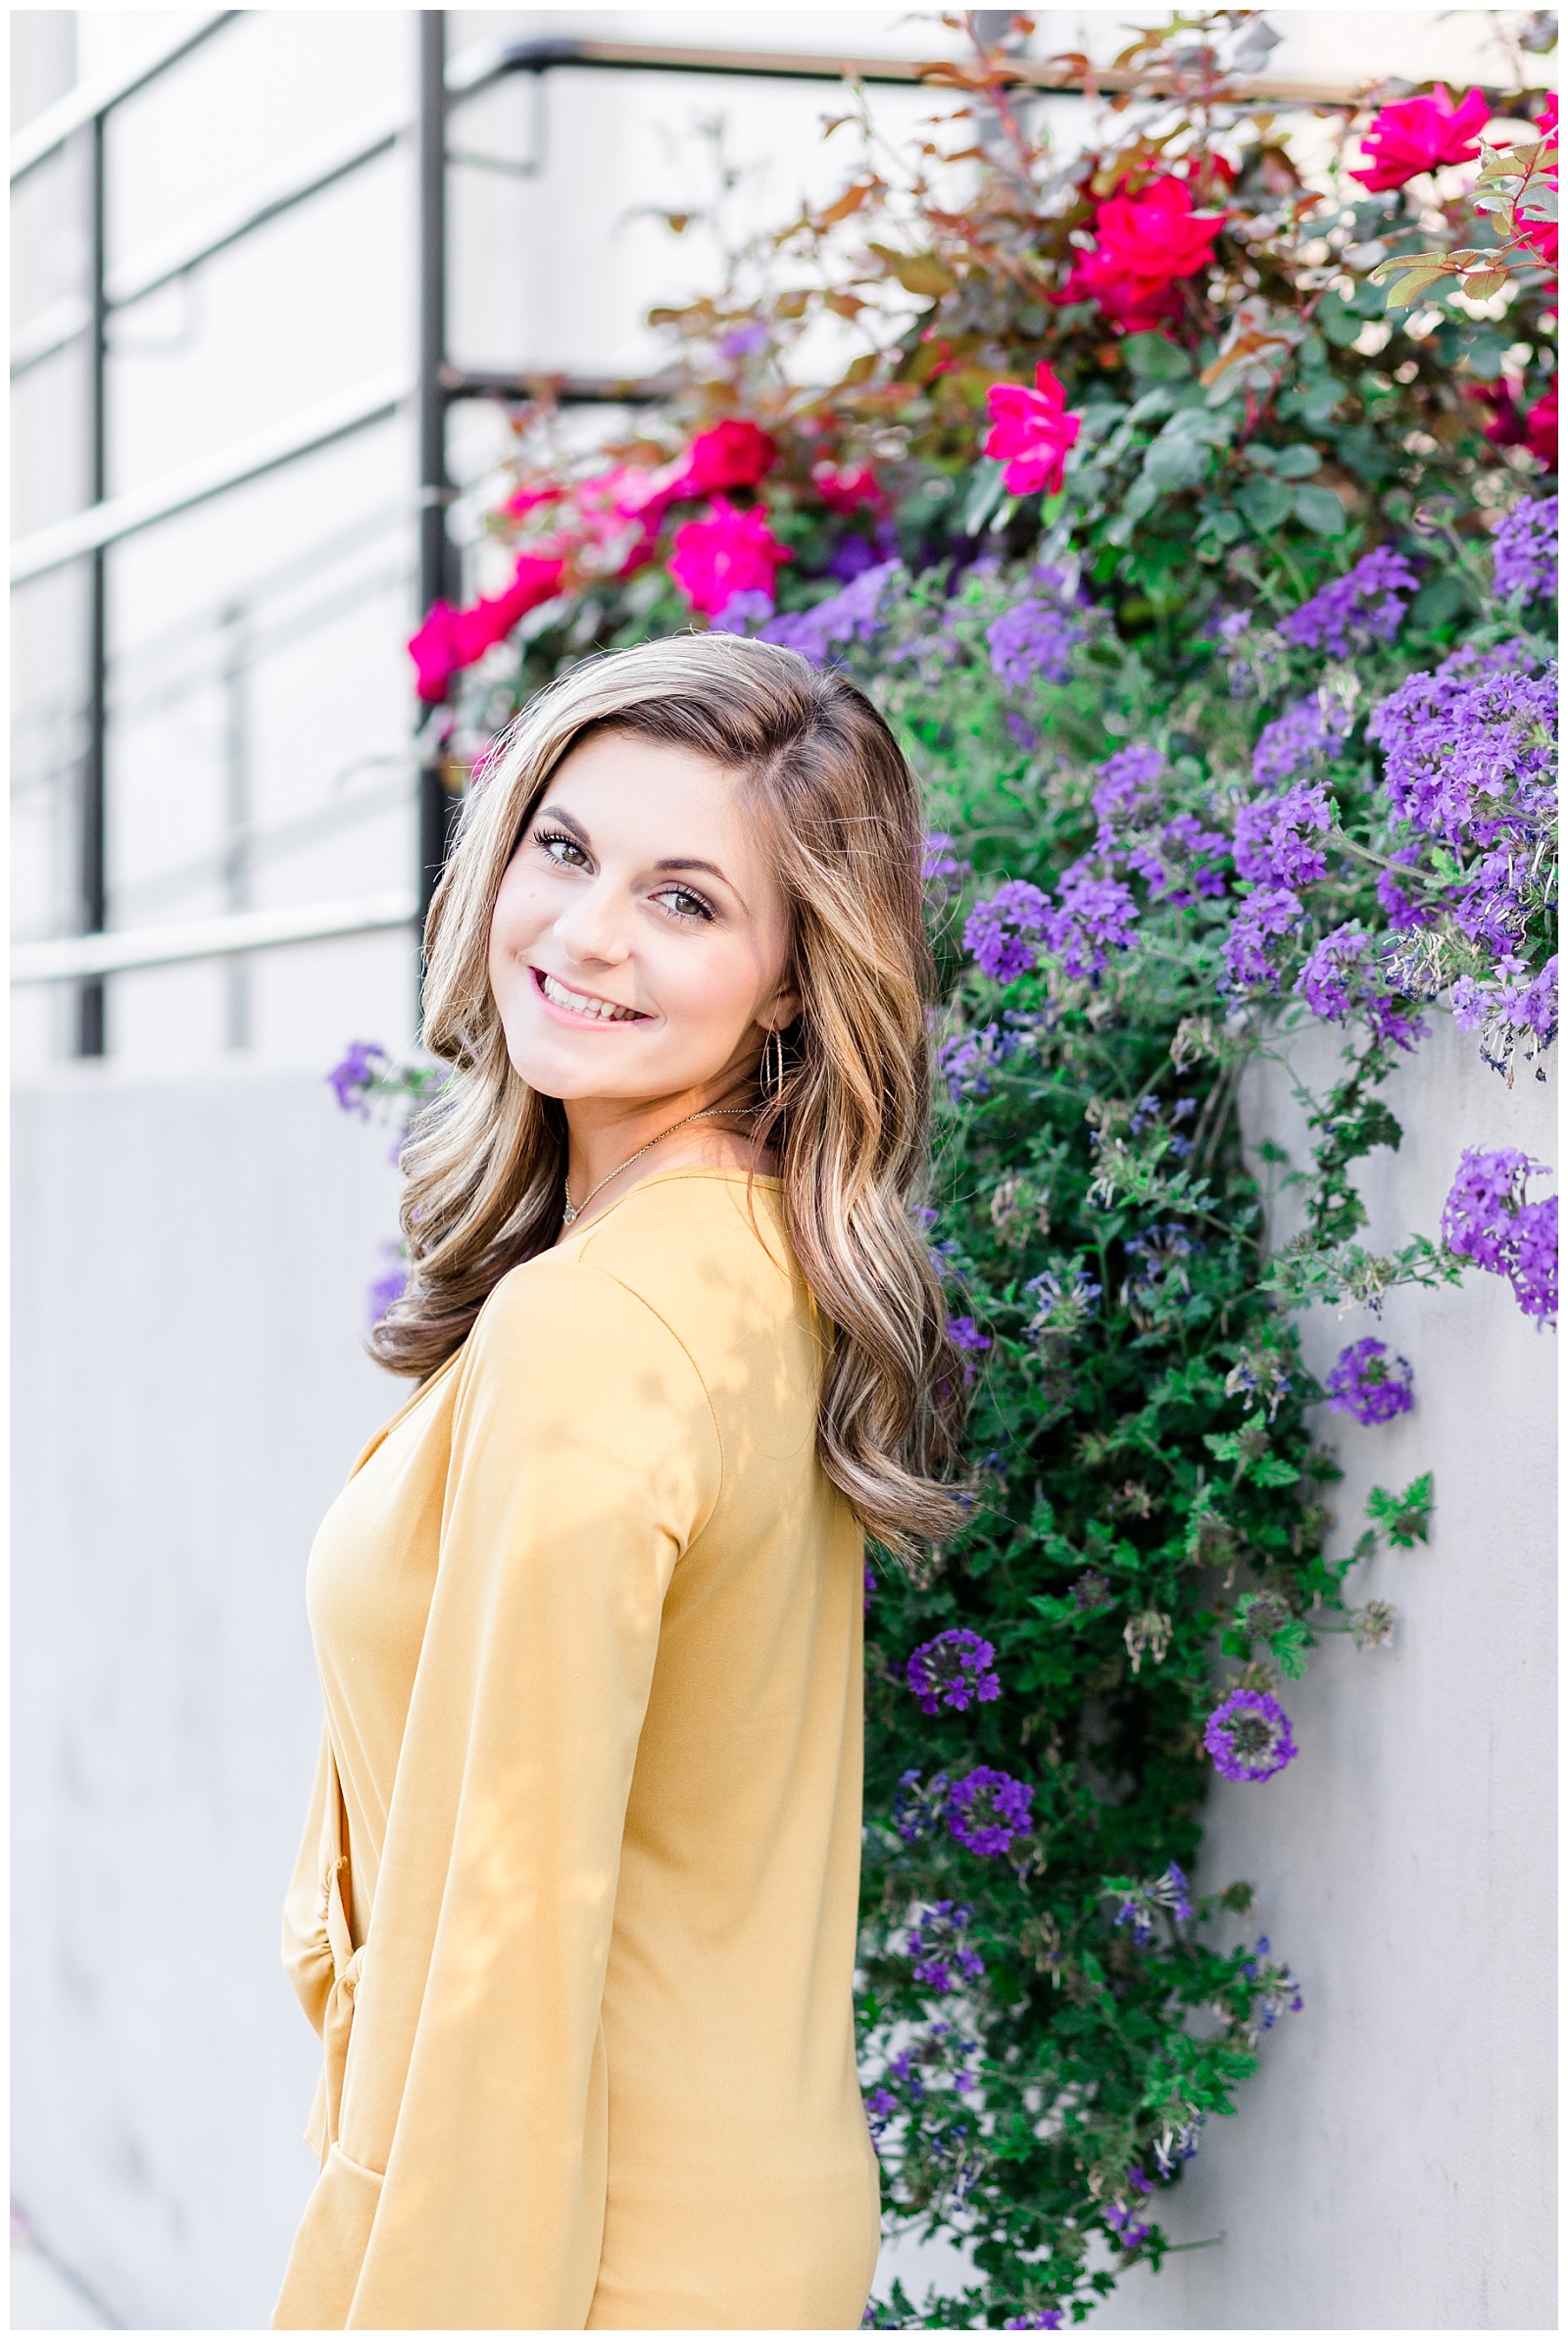 Downtown city senior portrait session in white jeans and a mustard yellow top with a marble building and flowers